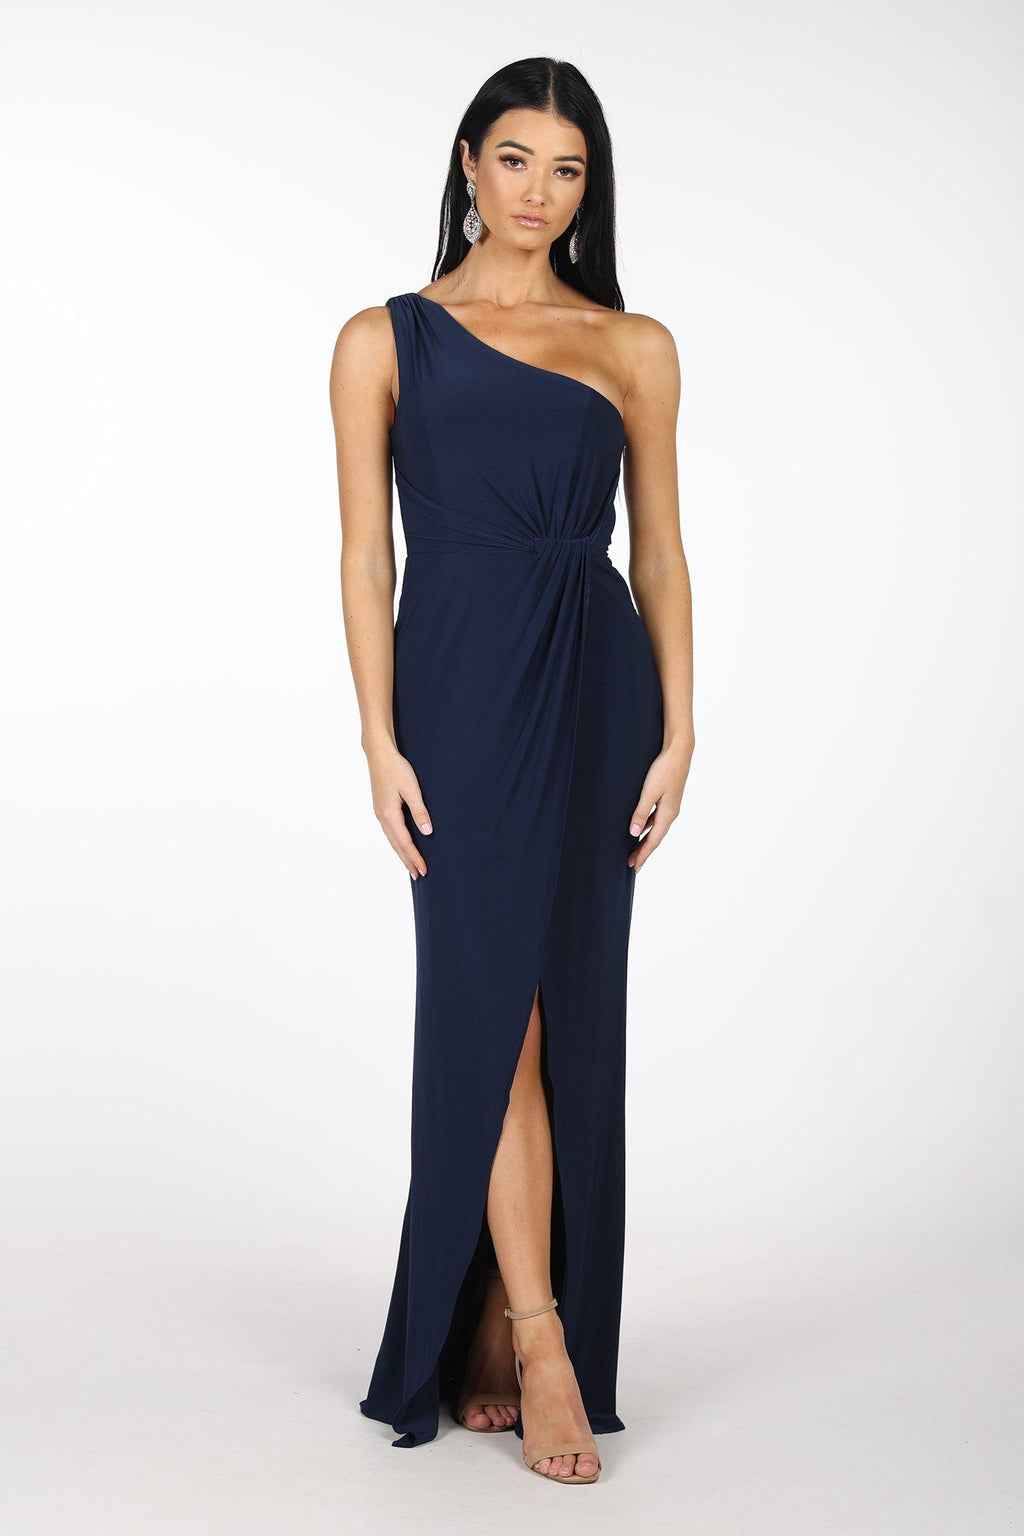 Deep Navy Blue One Shoulder Full Length Formal Dress with Asymmetrical One Shoulder Neckline, Ruched Waist, Above Knee Slit, and a Column Styled Silhouette